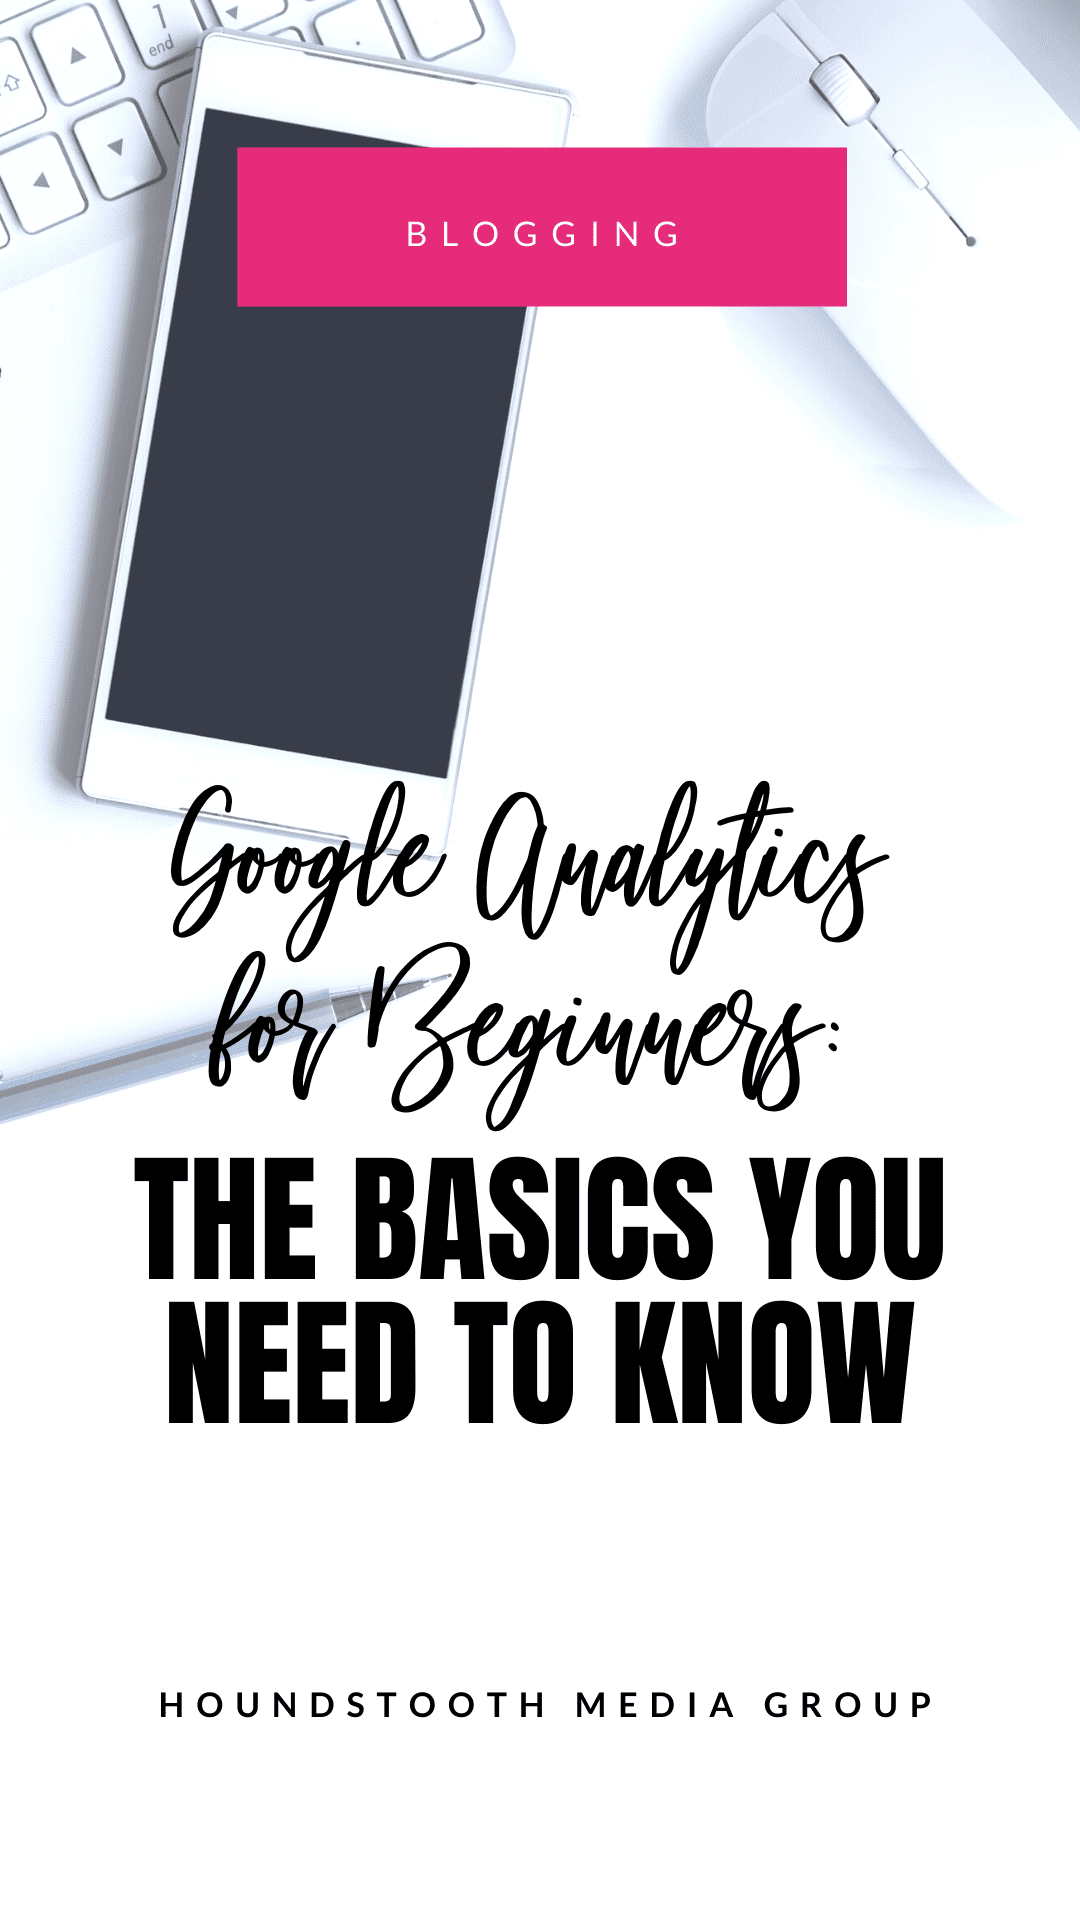 Google Analytics for Beginners The Basics You Need to Know